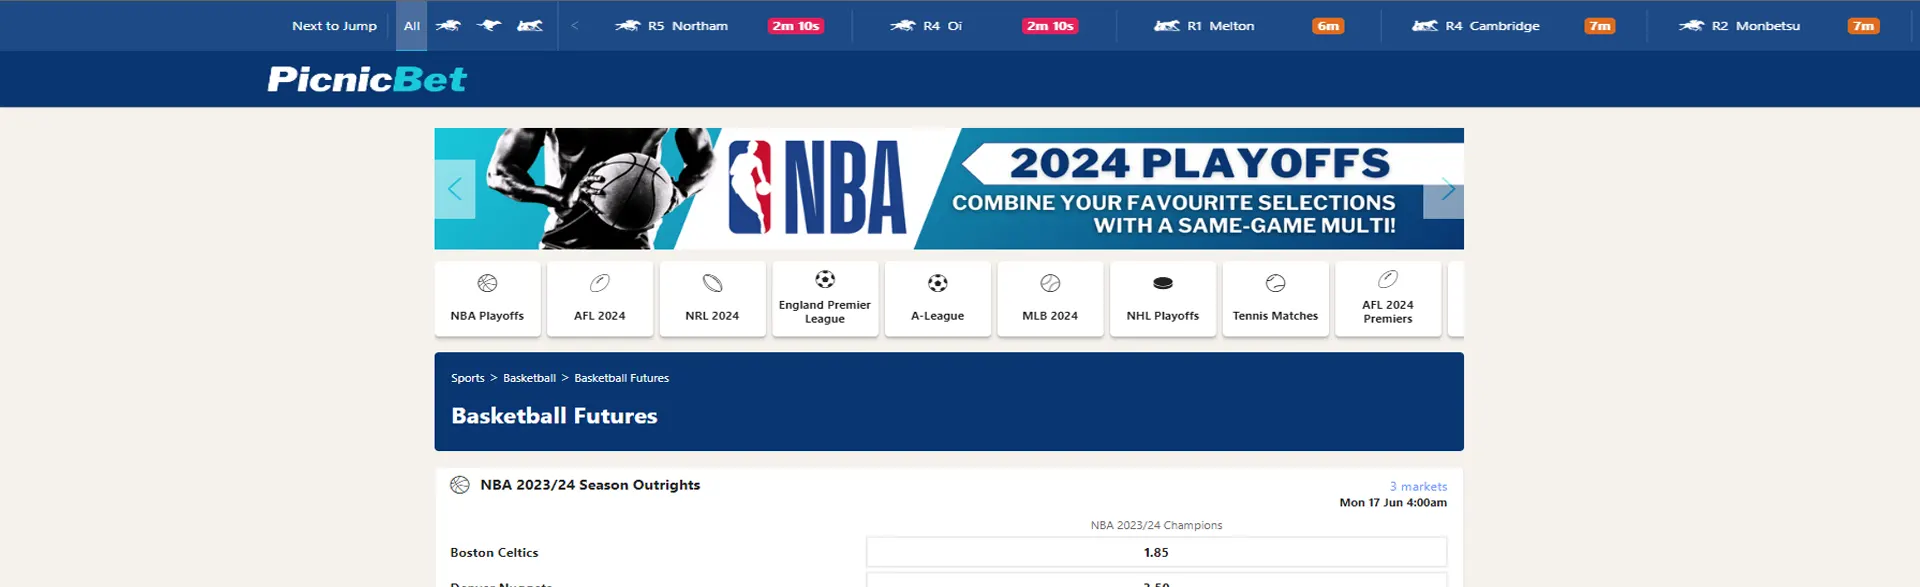 Homepage displaying racing and sports betting options PicnicBet